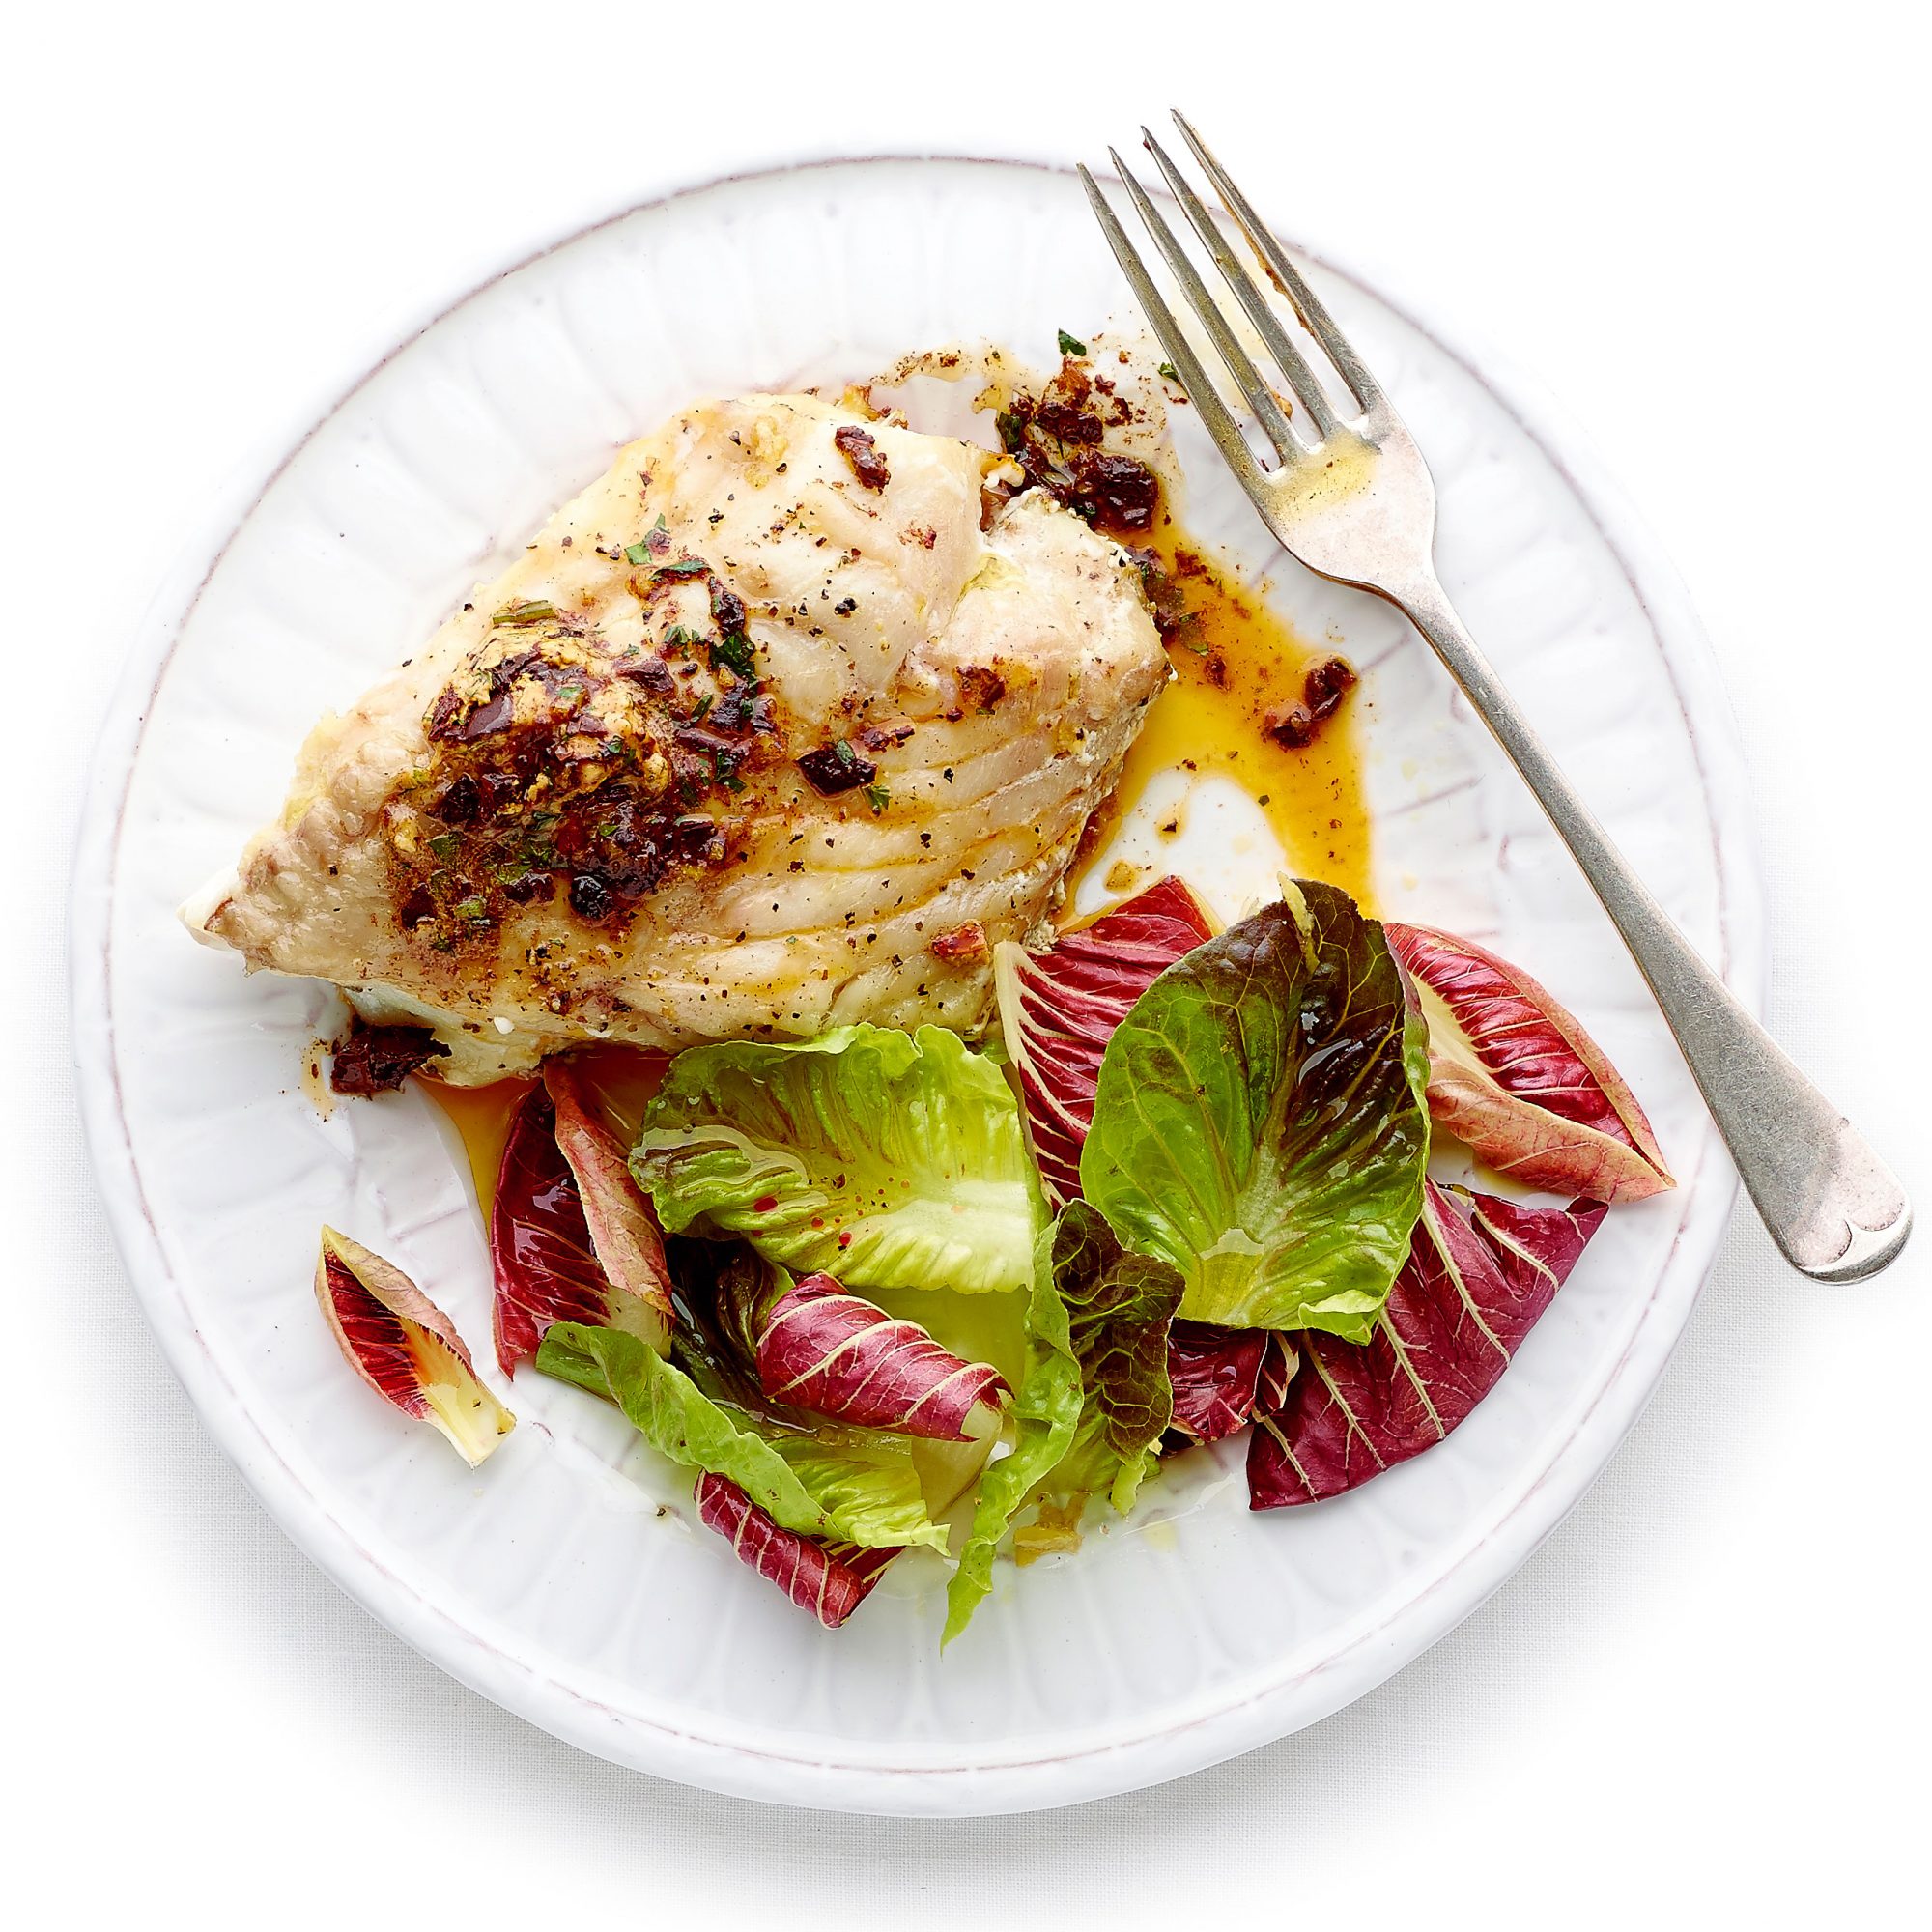 If the meat is tired: 5 healthy fish dishes that are easy to cook - Easy Ve...